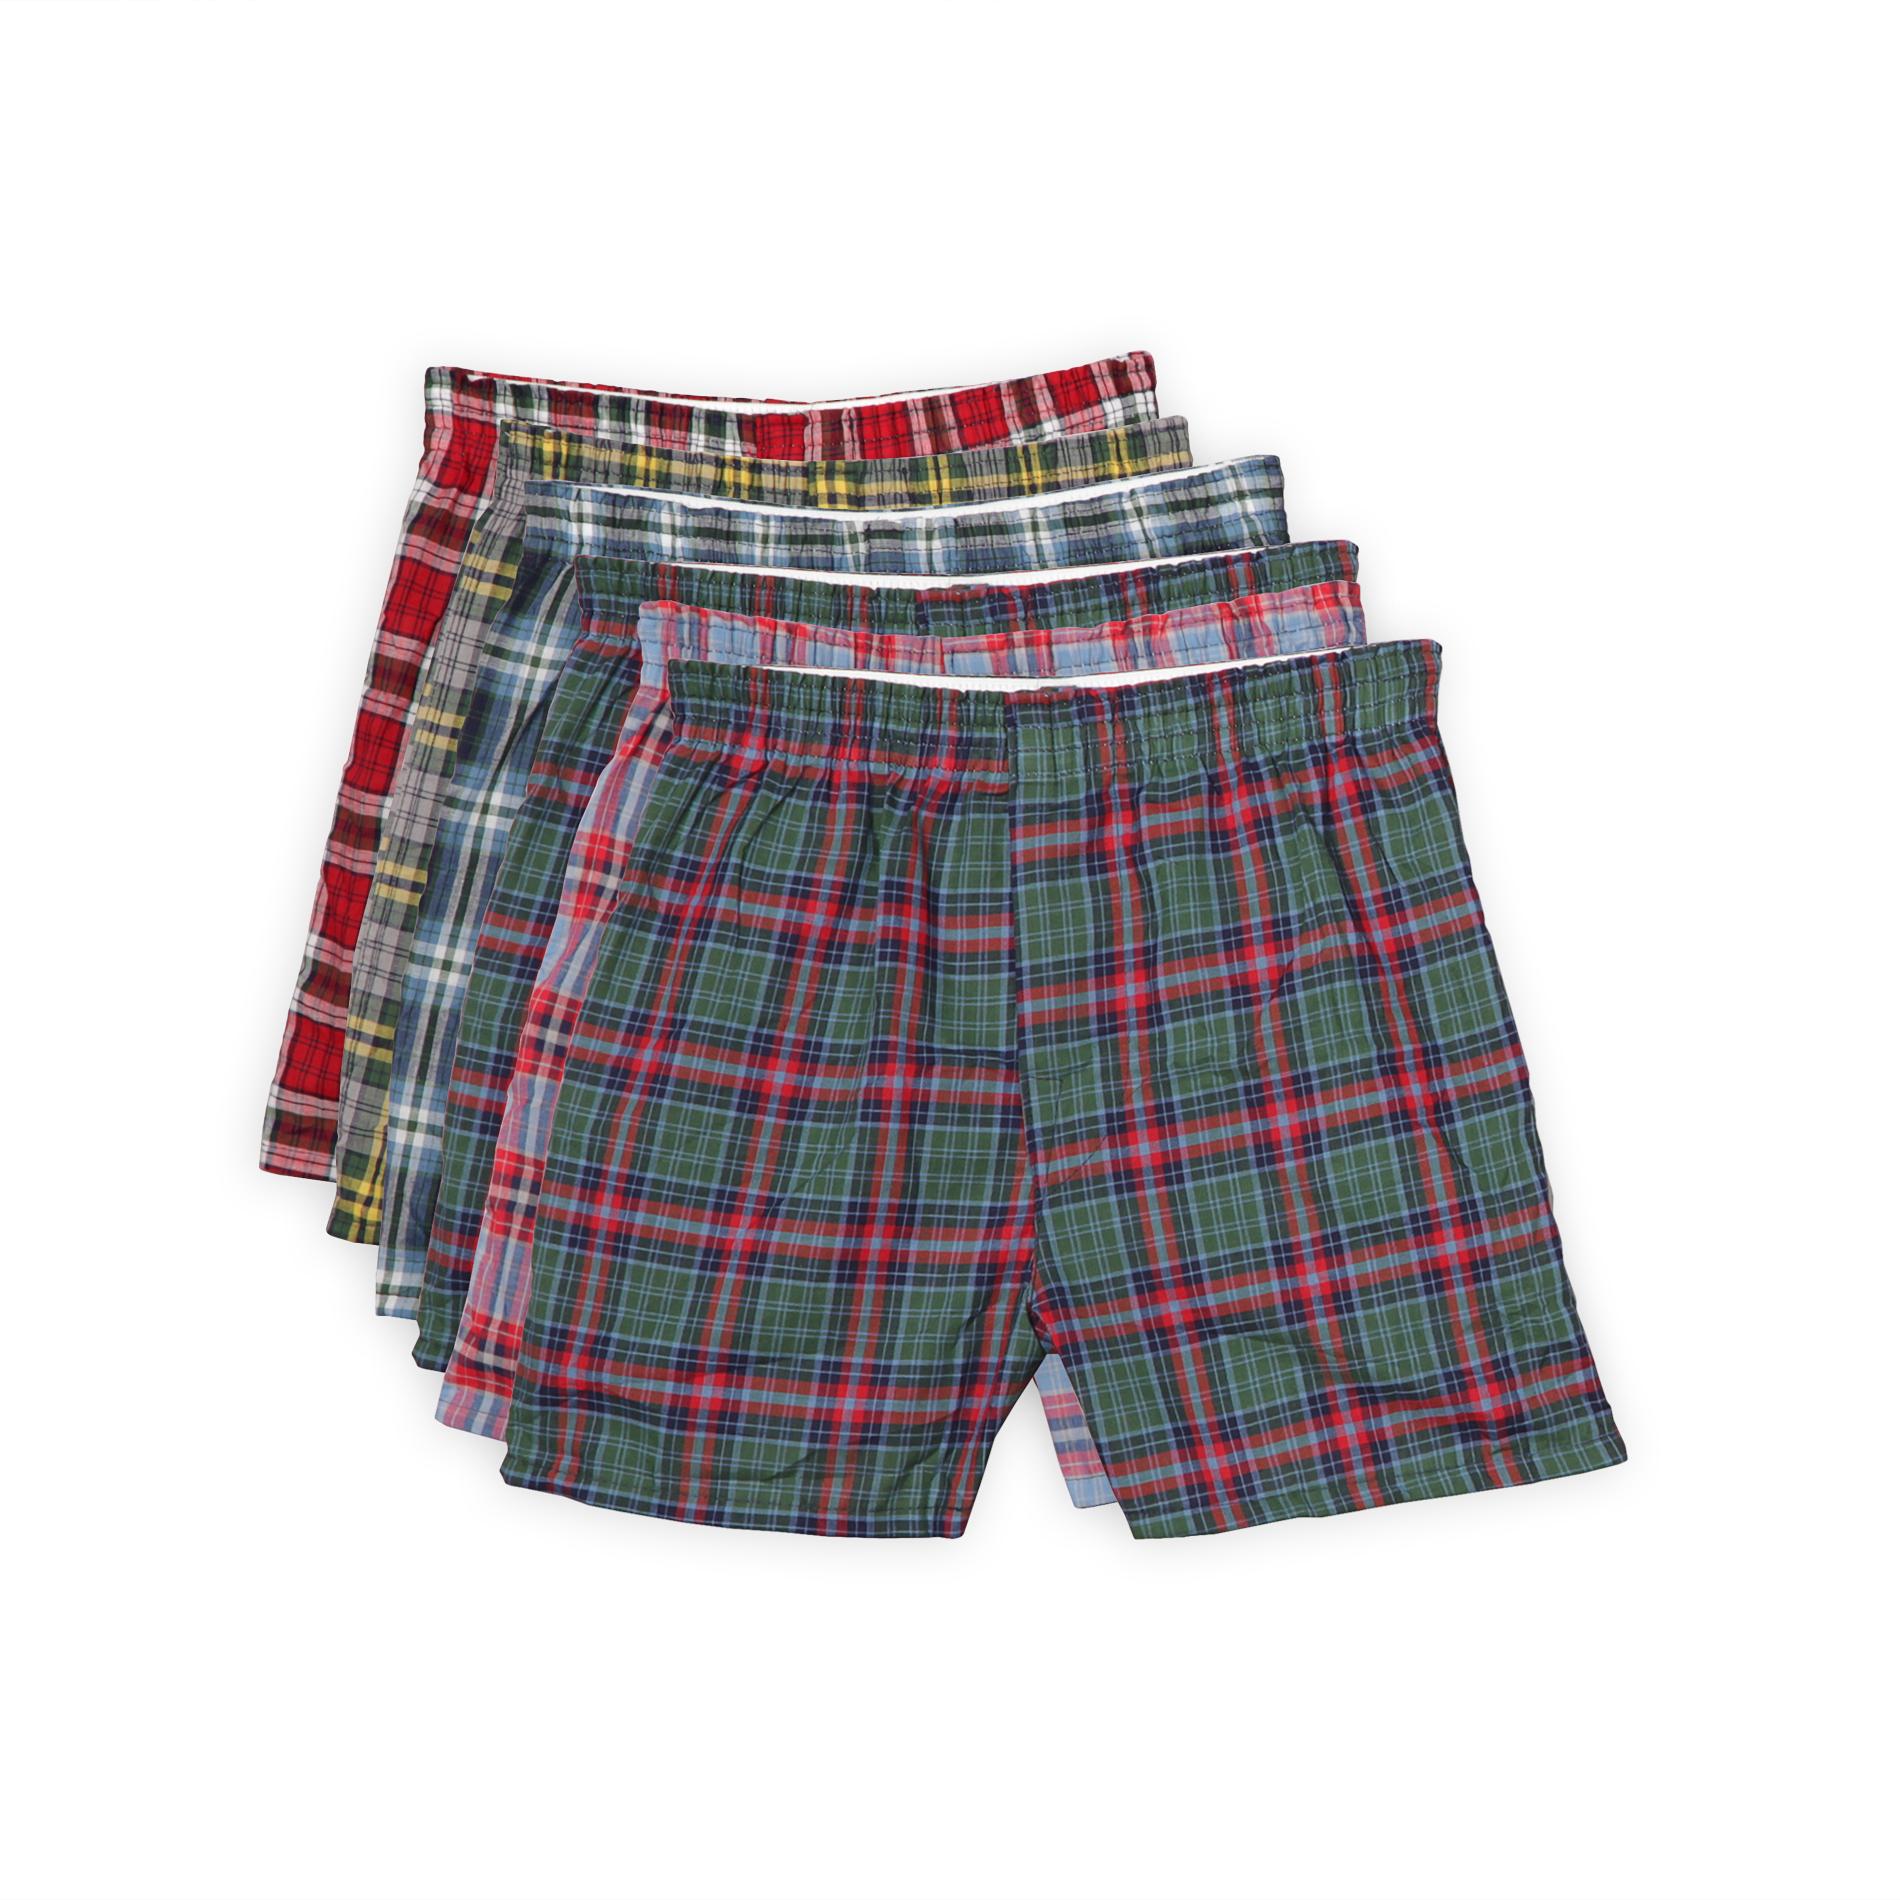 Fruit of the Loom Boy's Boxer Shorts - Plaid